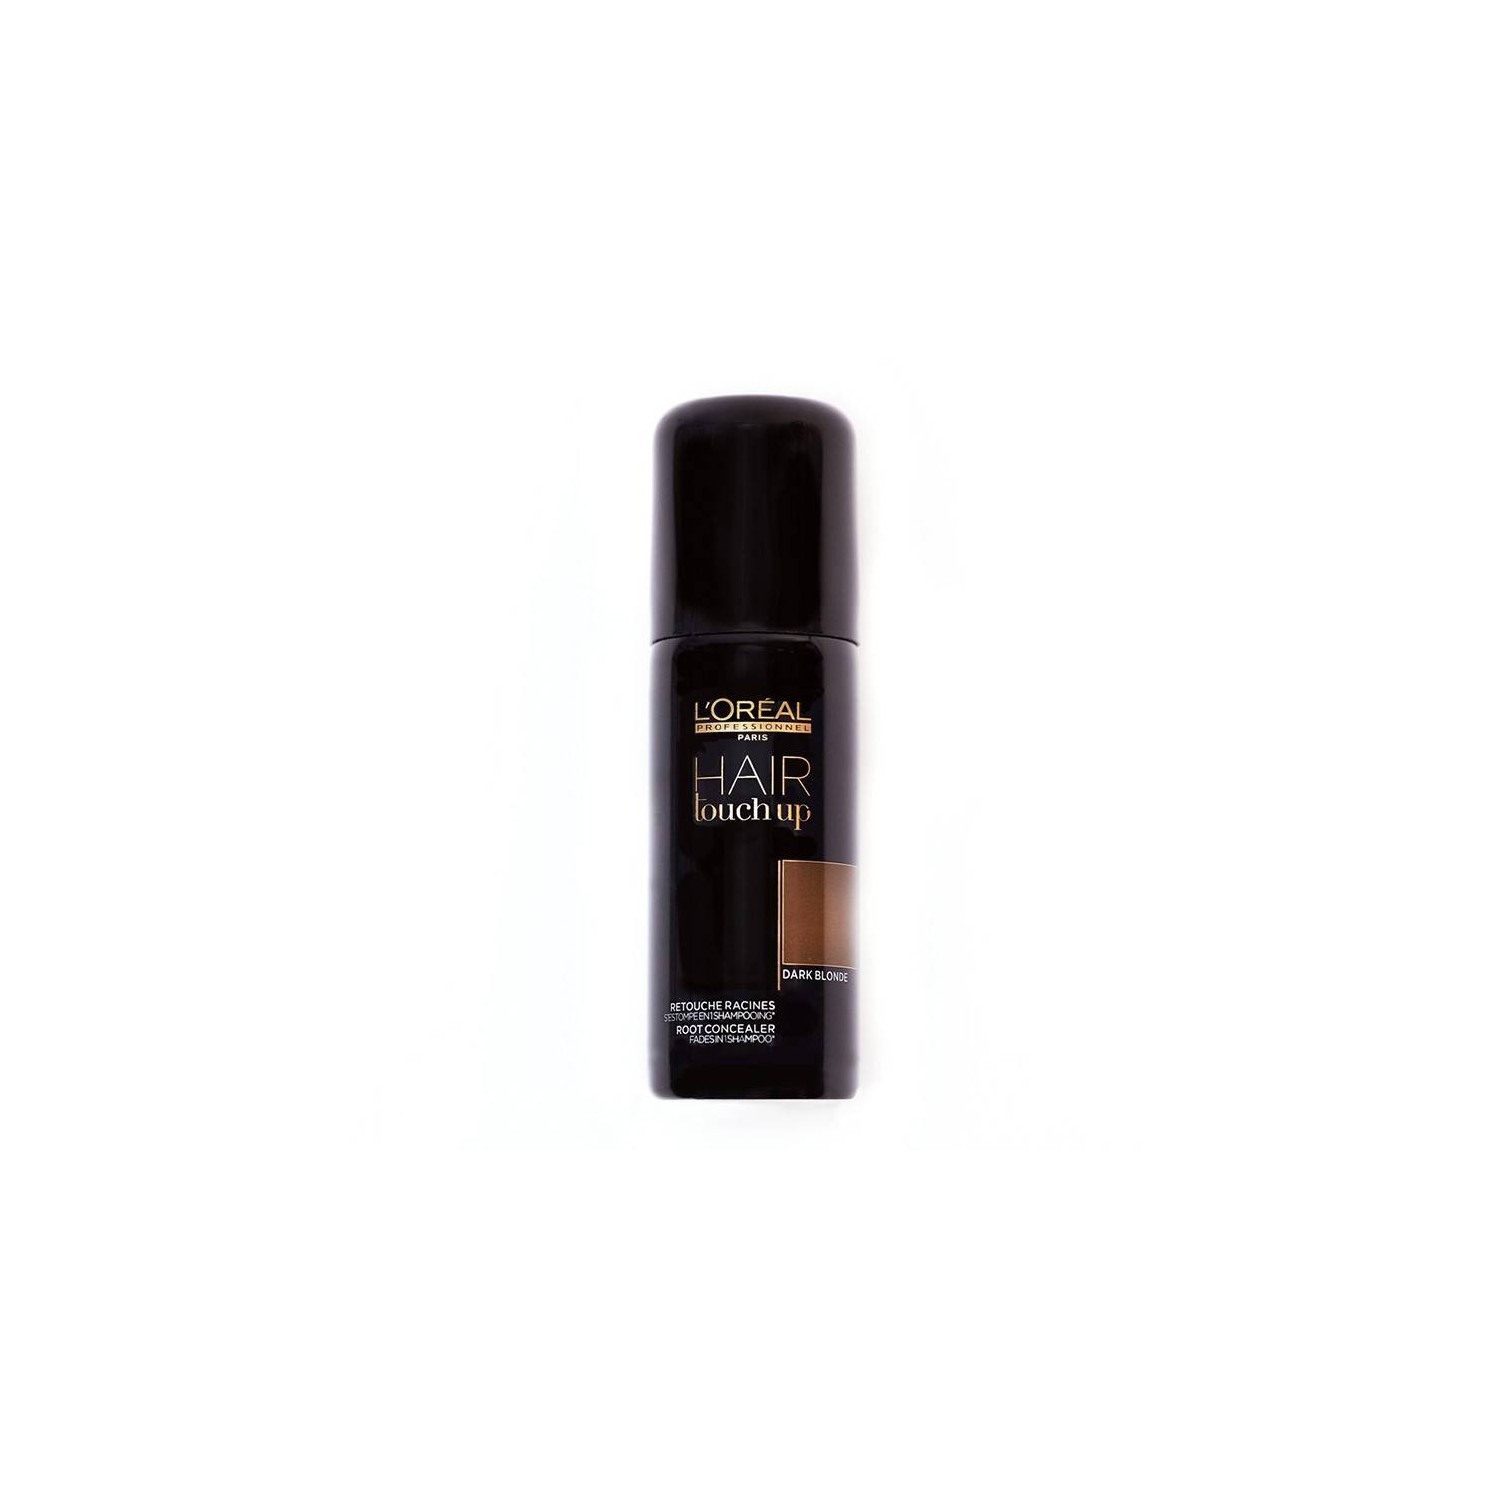 Loreal Cheveux Touch Up Light Marron 75 ml